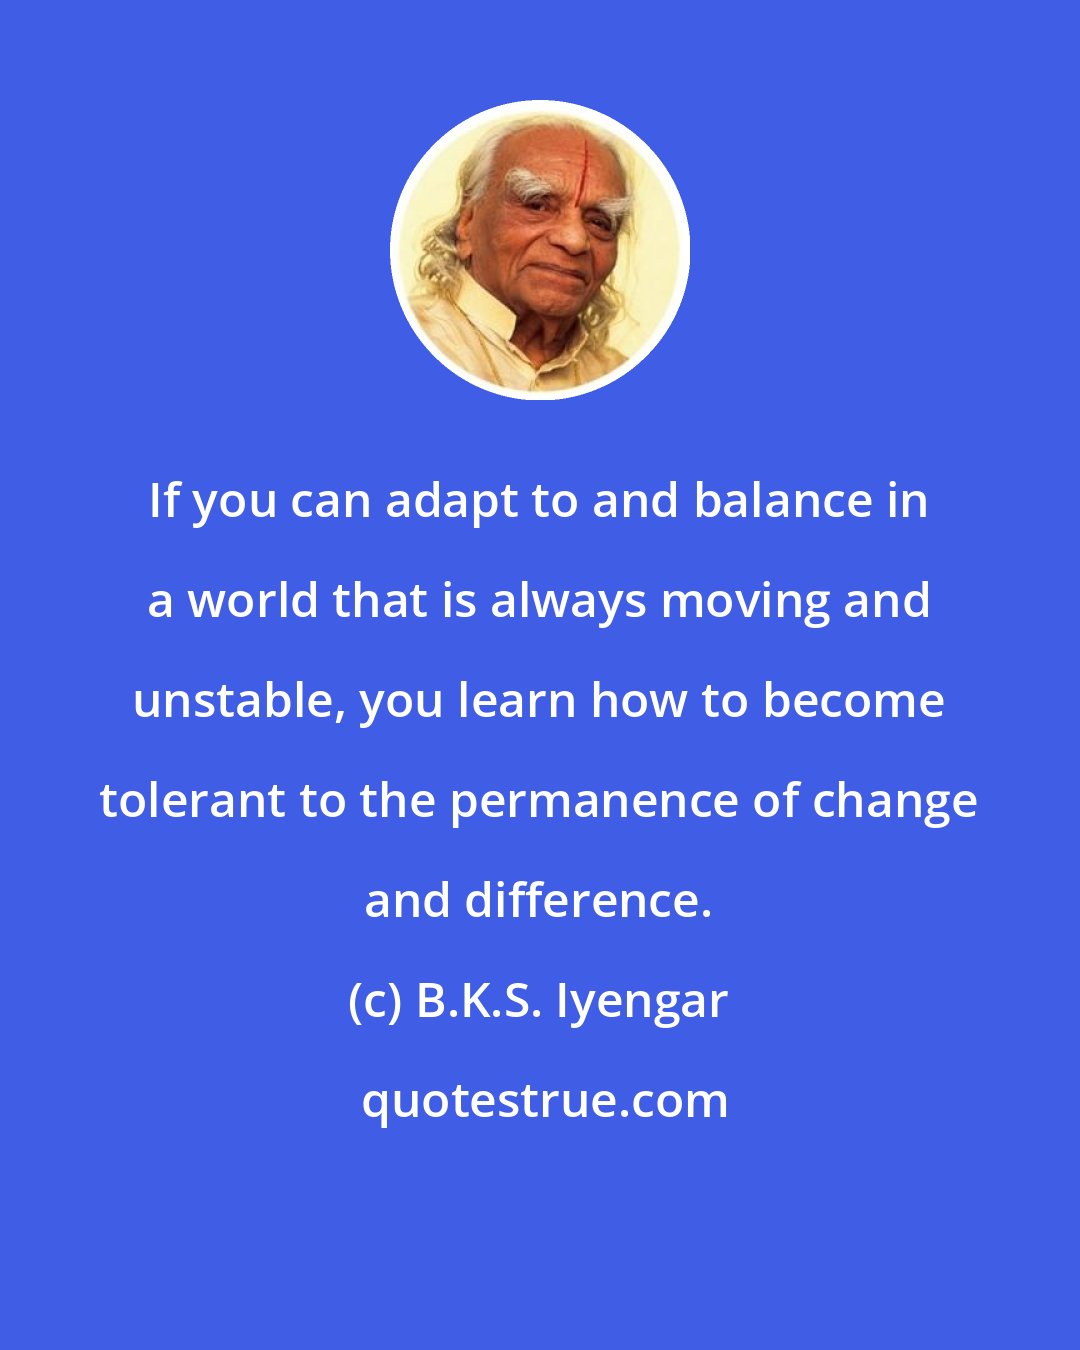 B.K.S. Iyengar: If you can adapt to and balance in a world that is always moving and unstable, you learn how to become tolerant to the permanence of change and difference.